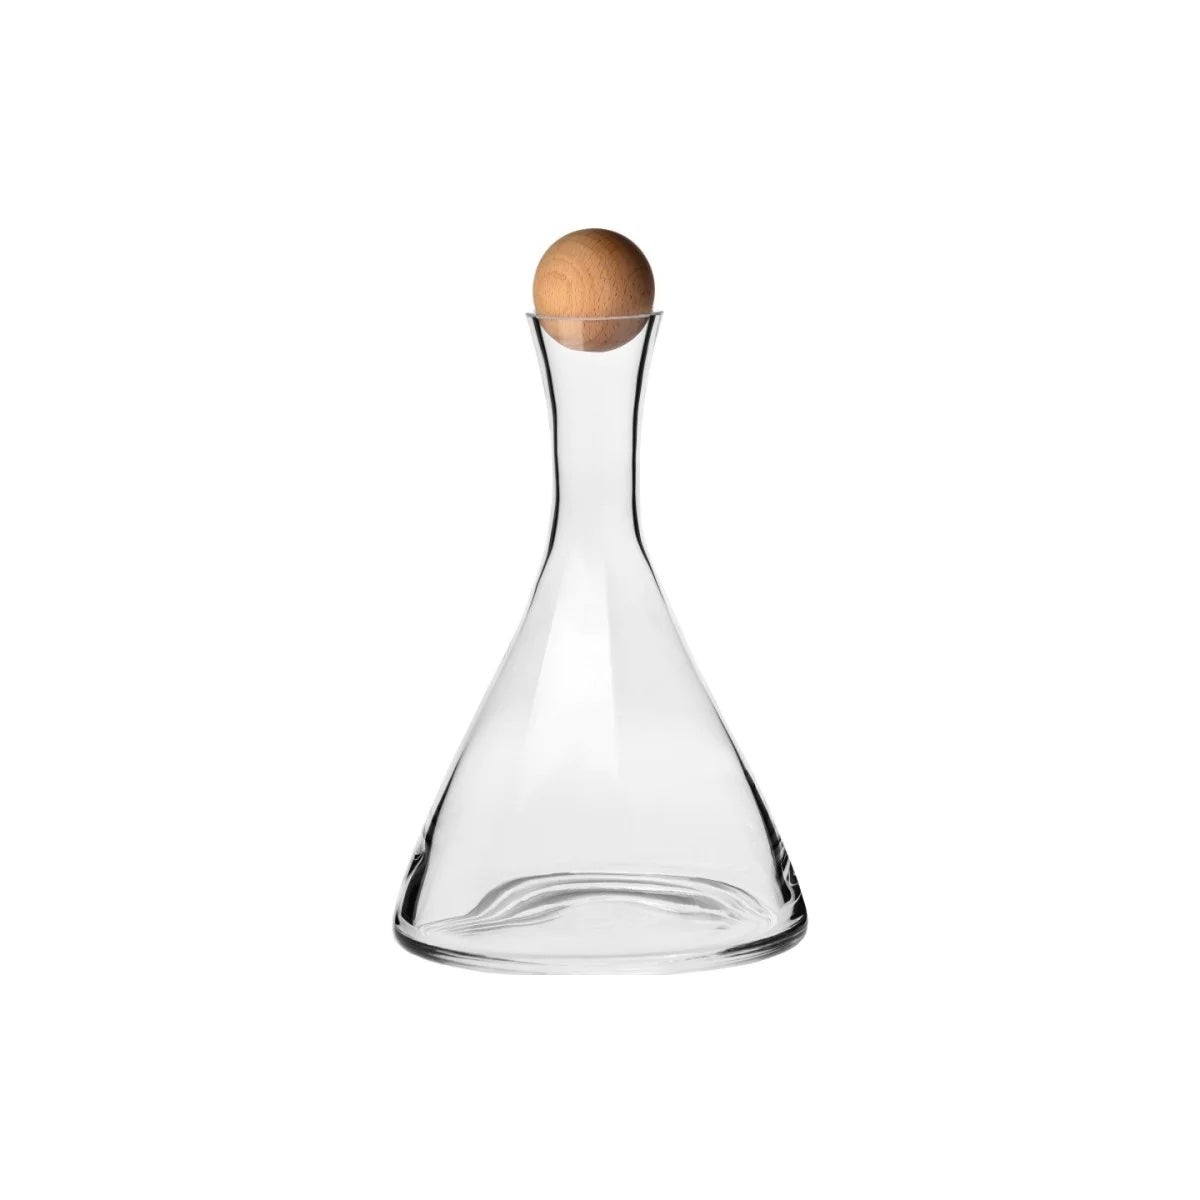 Krosno + Connoisseur Wine Decanter with Beechwood Stopper